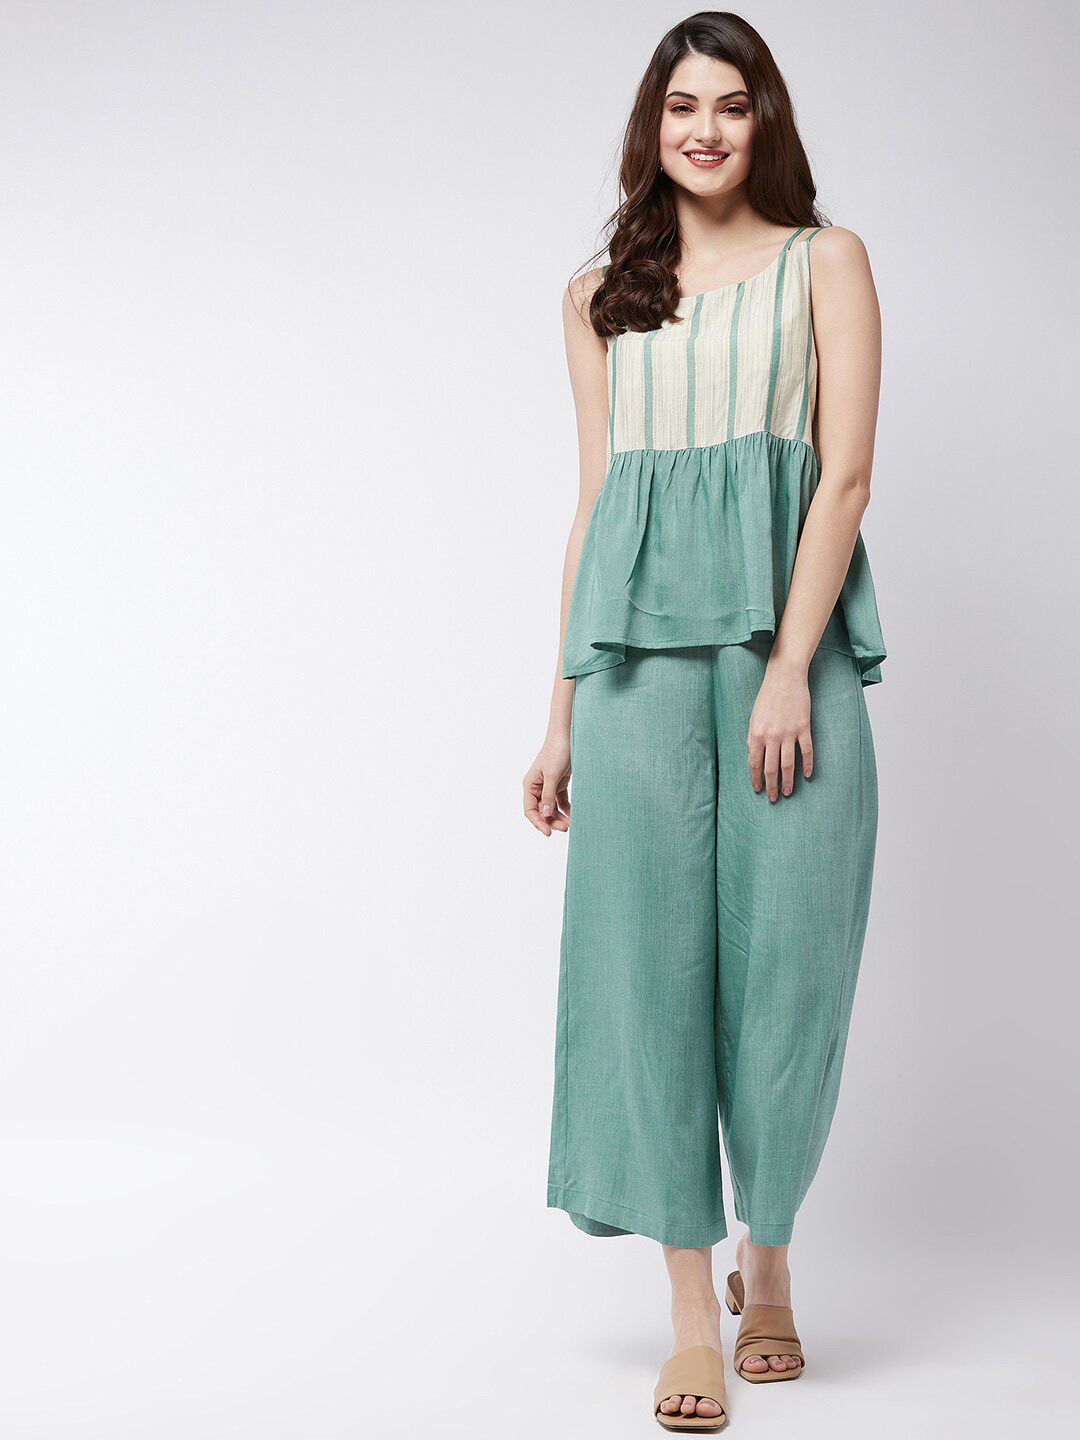 Pannkh Green Striped Round Neck Top Price in India